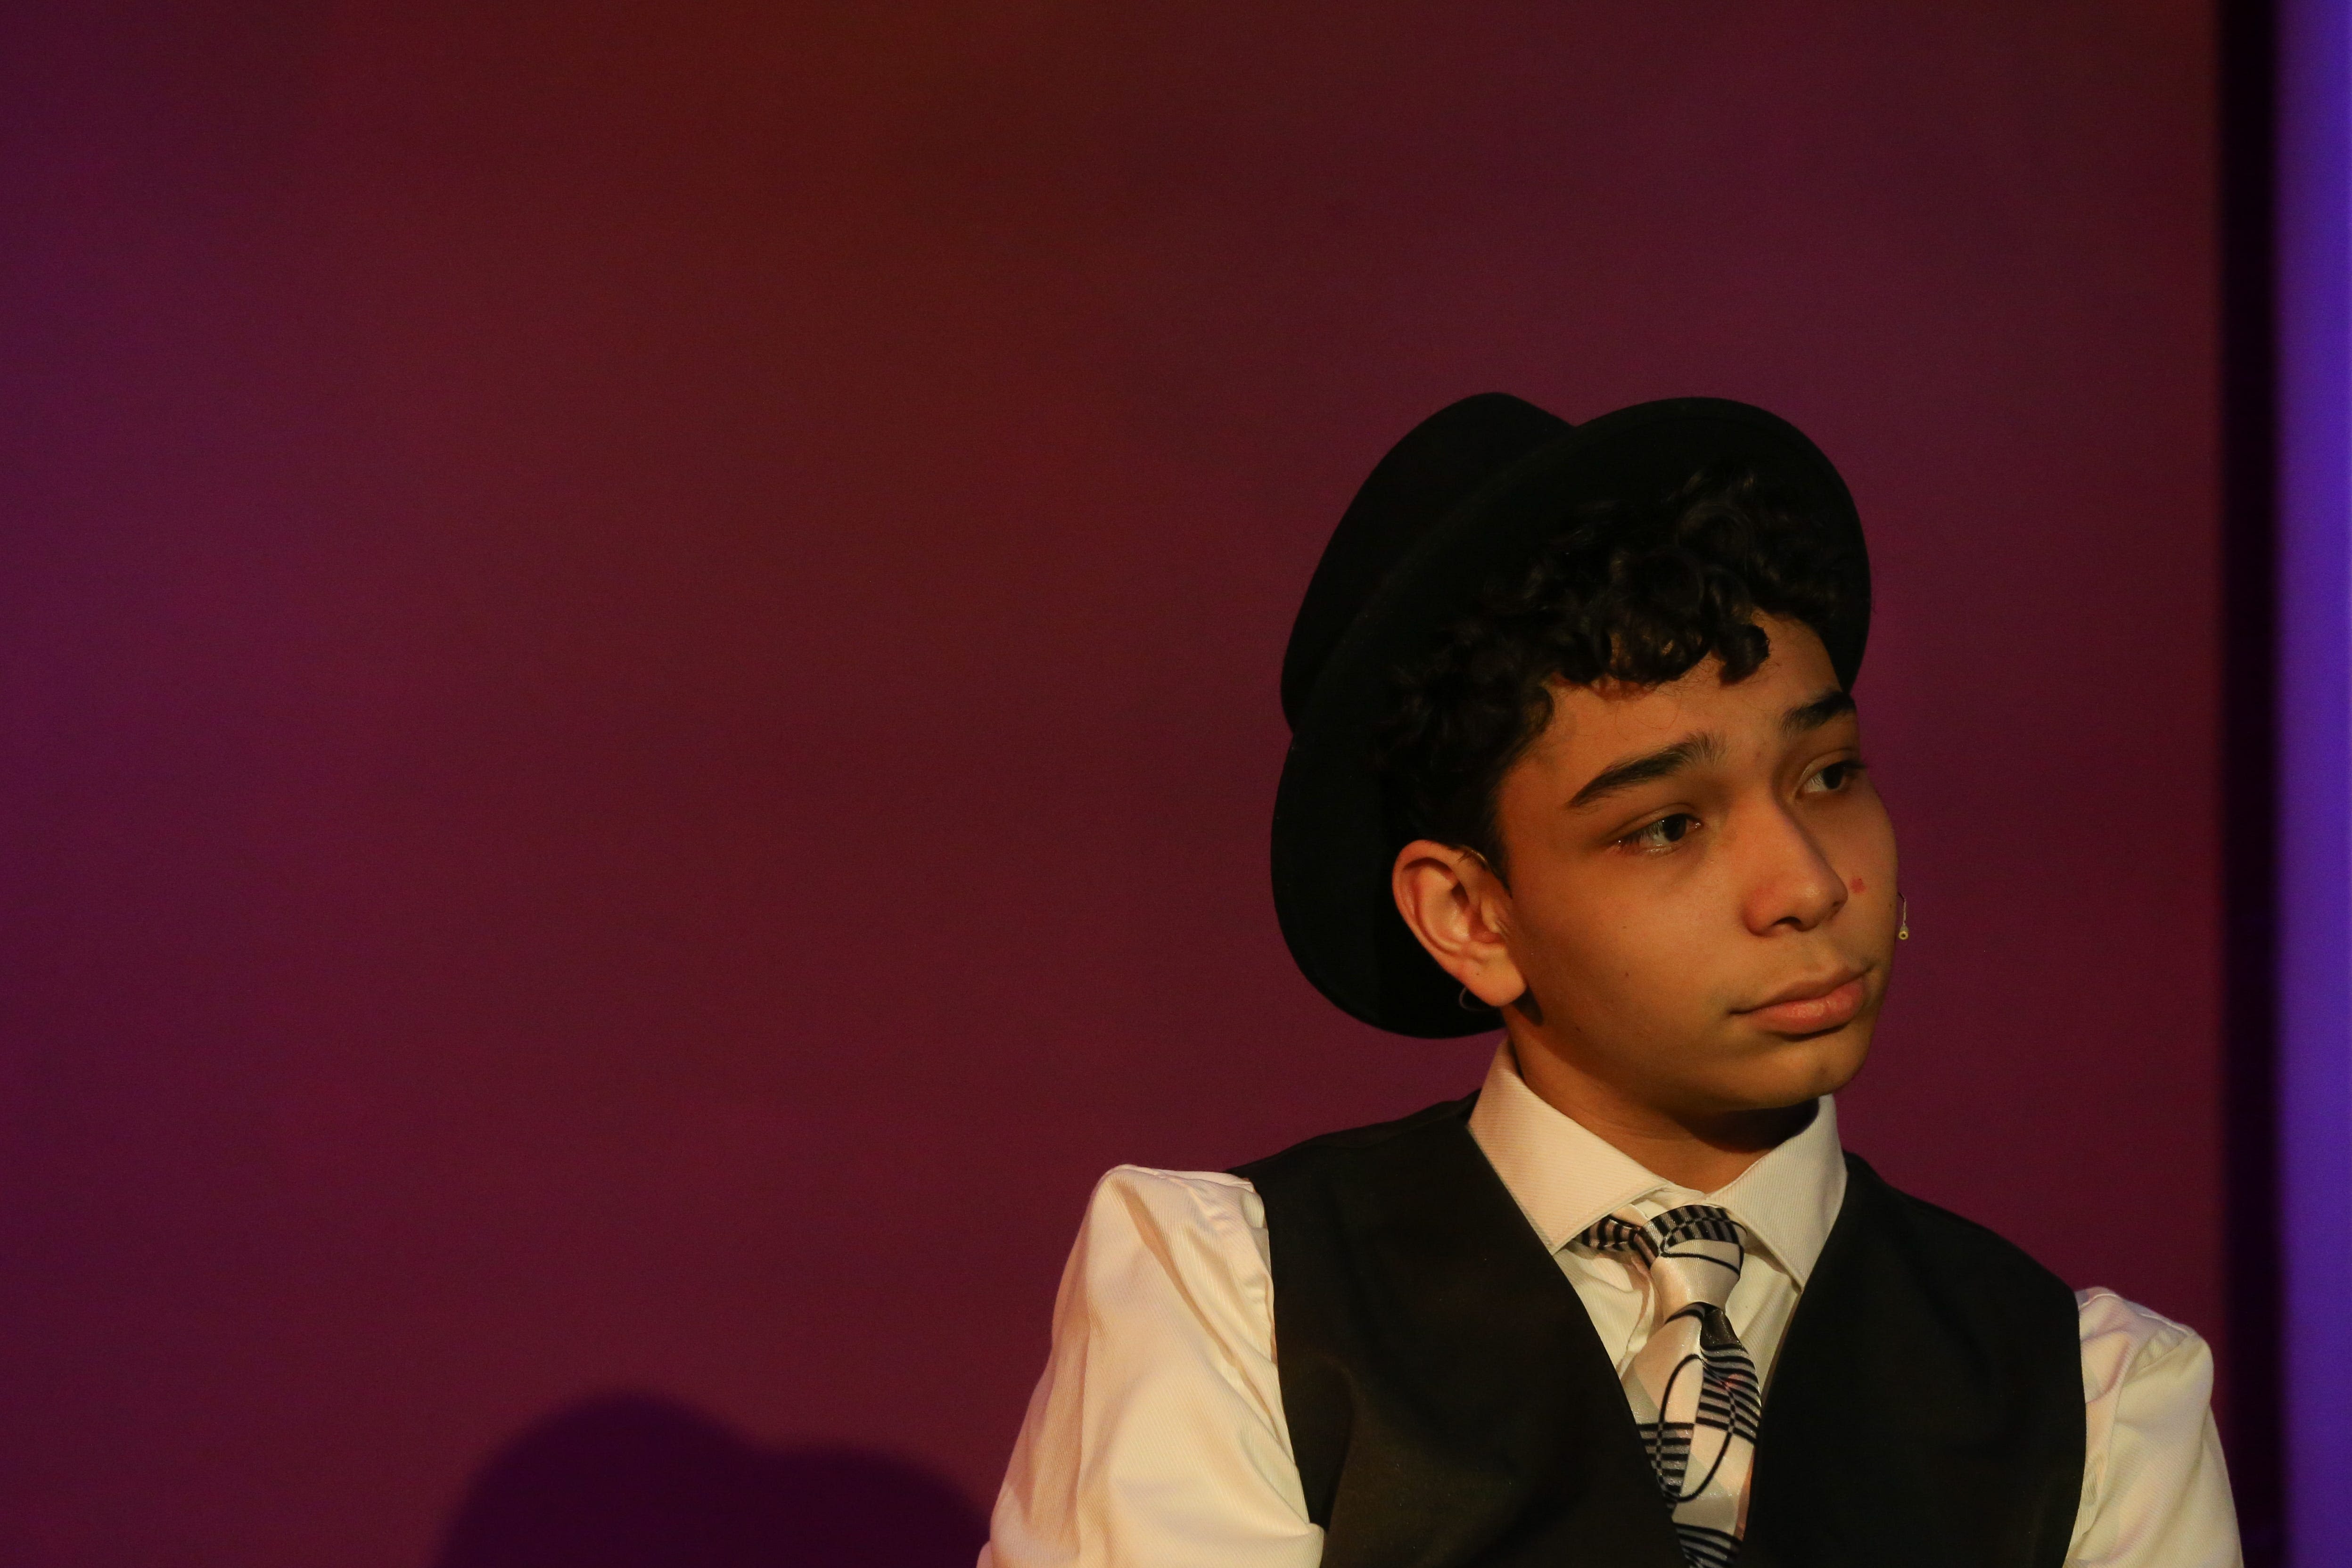 'They live for theater': Aurora Arts Theatre puts on 'Bugsy Malone' for summer show